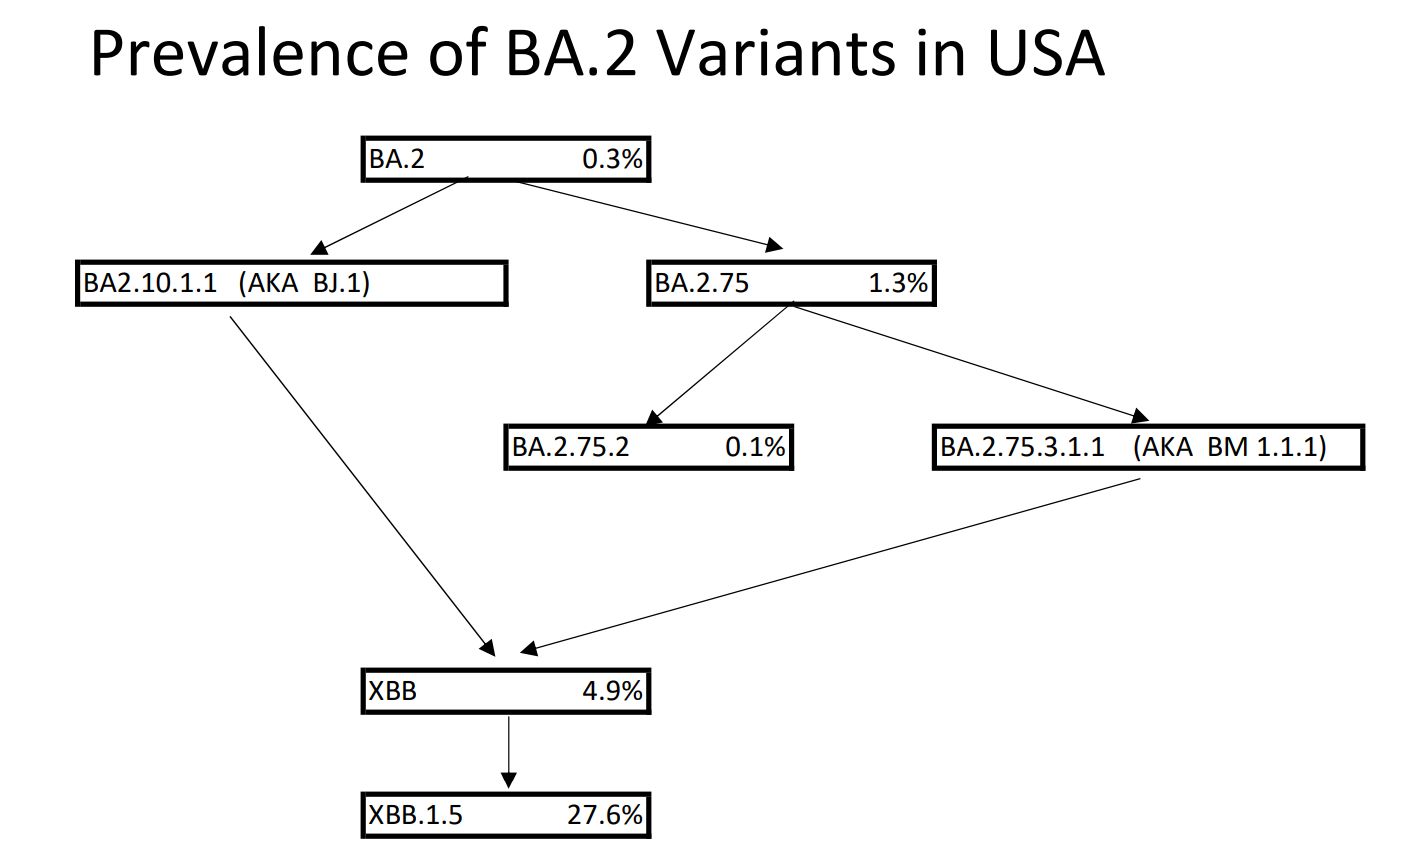 chart showing prevalence of BA.2 variants in USA